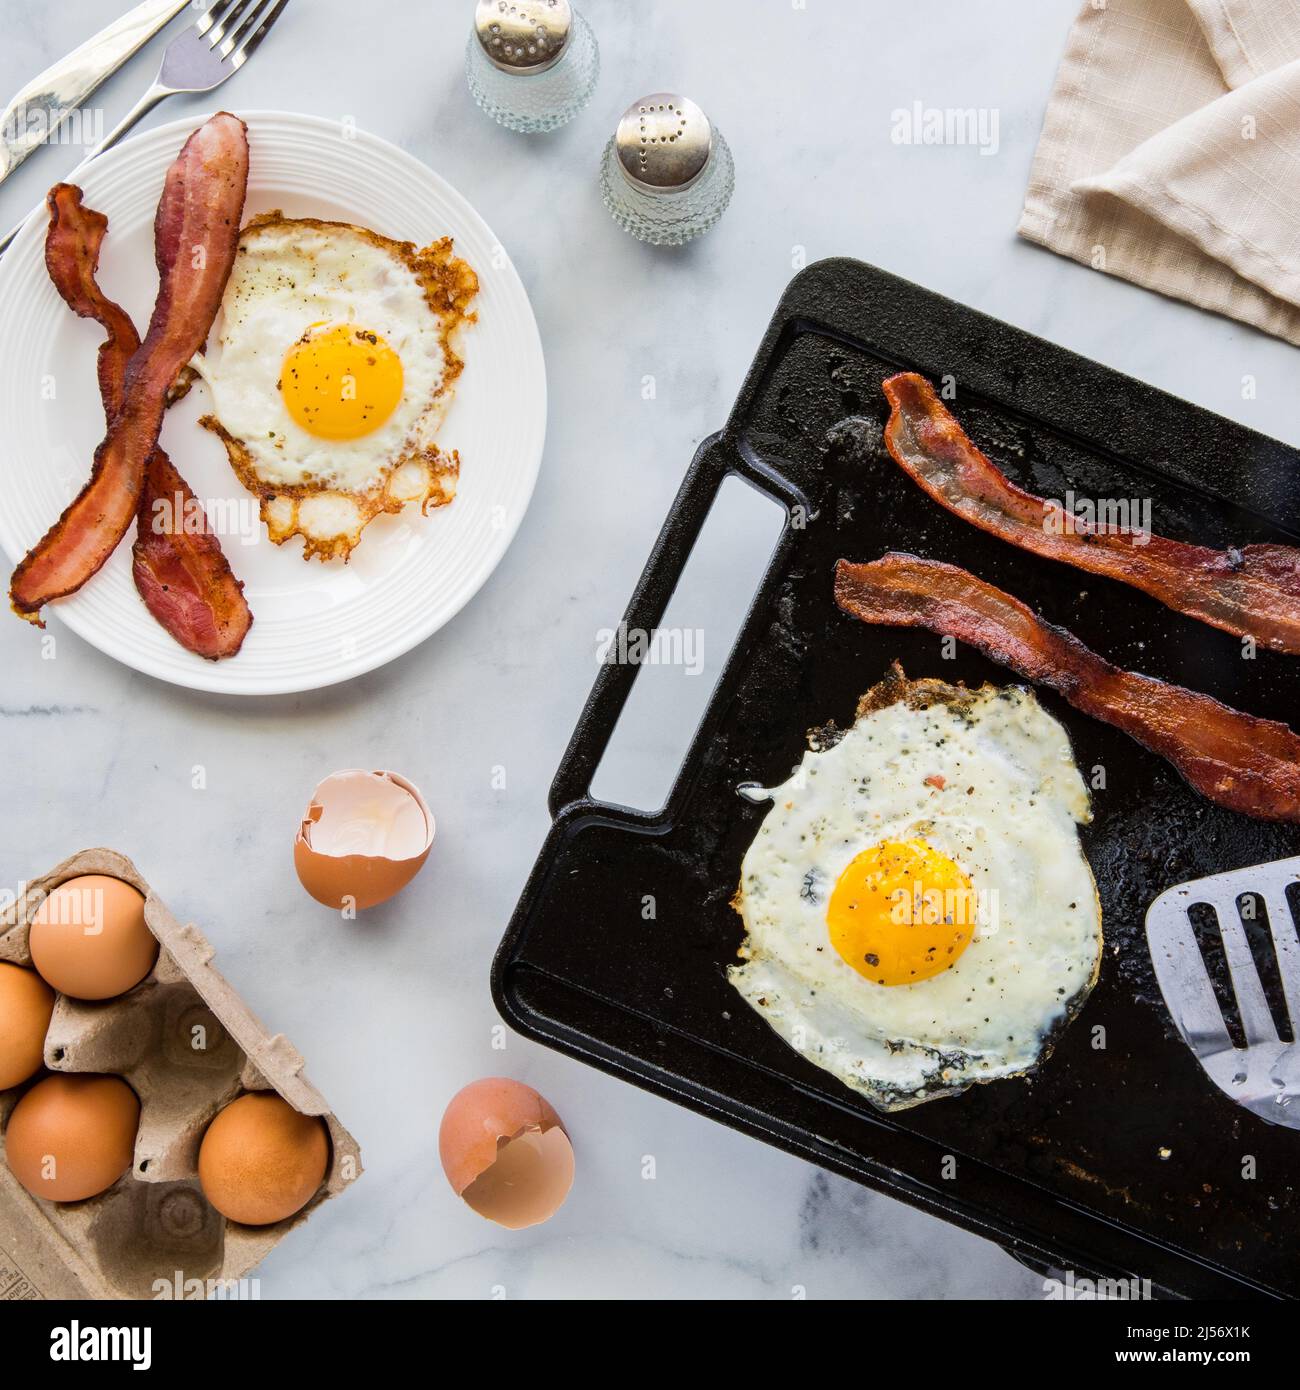 https://c8.alamy.com/comp/2J56X1K/top-down-view-of-a-griddle-pan-cooking-bacon-and-eggs-for-breakfast-2J56X1K.jpg